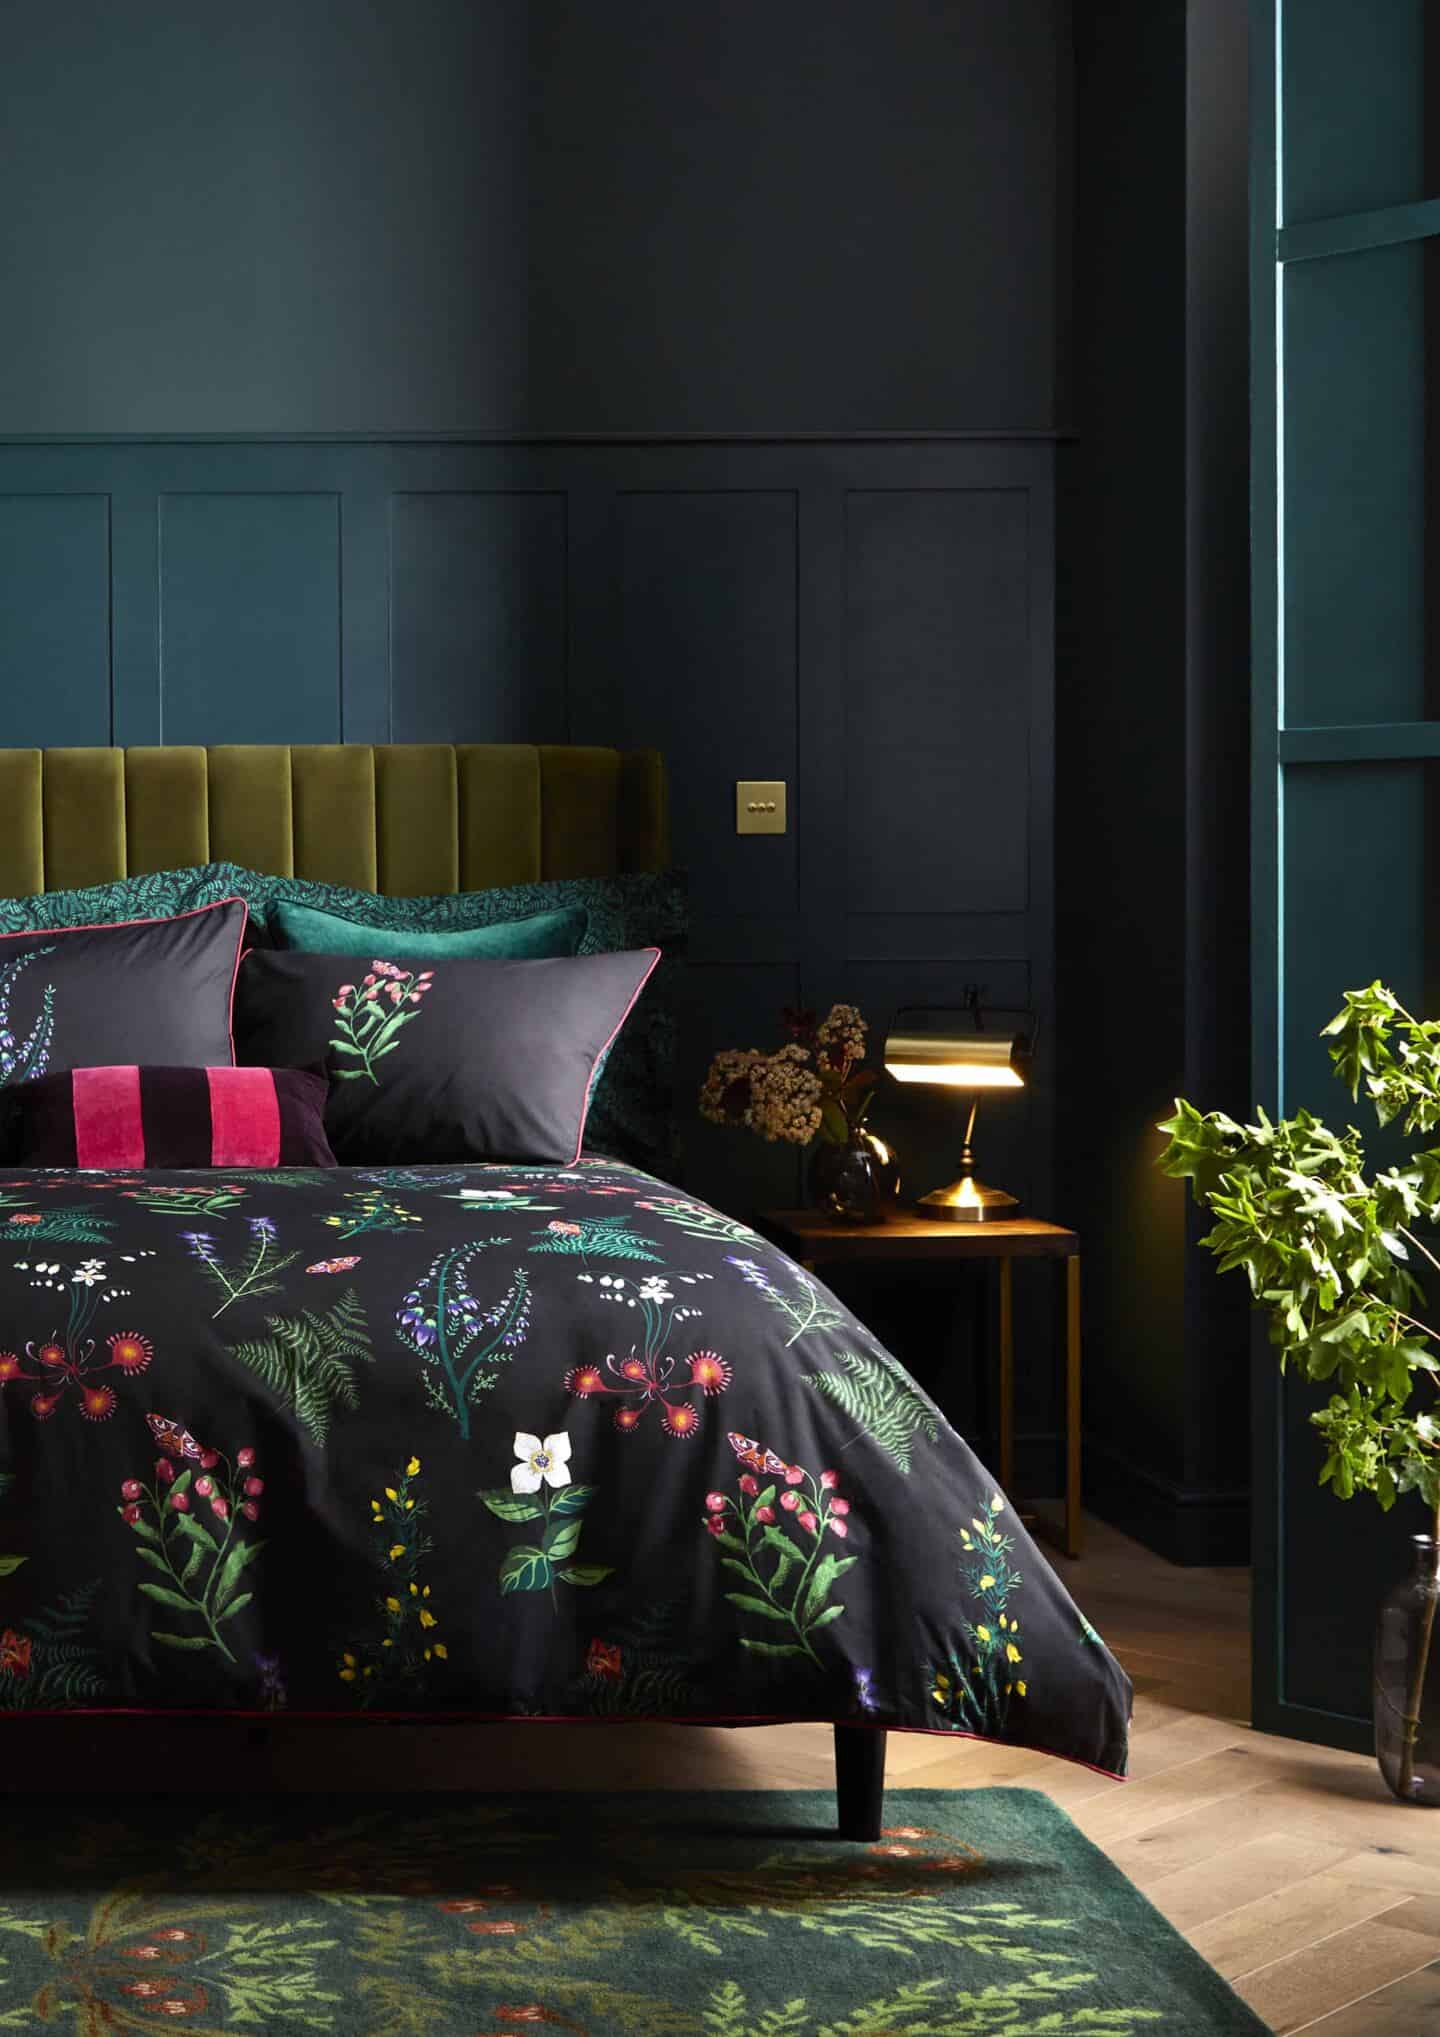 A cosy dark bedroom with luxurious bedding and a soft green rug